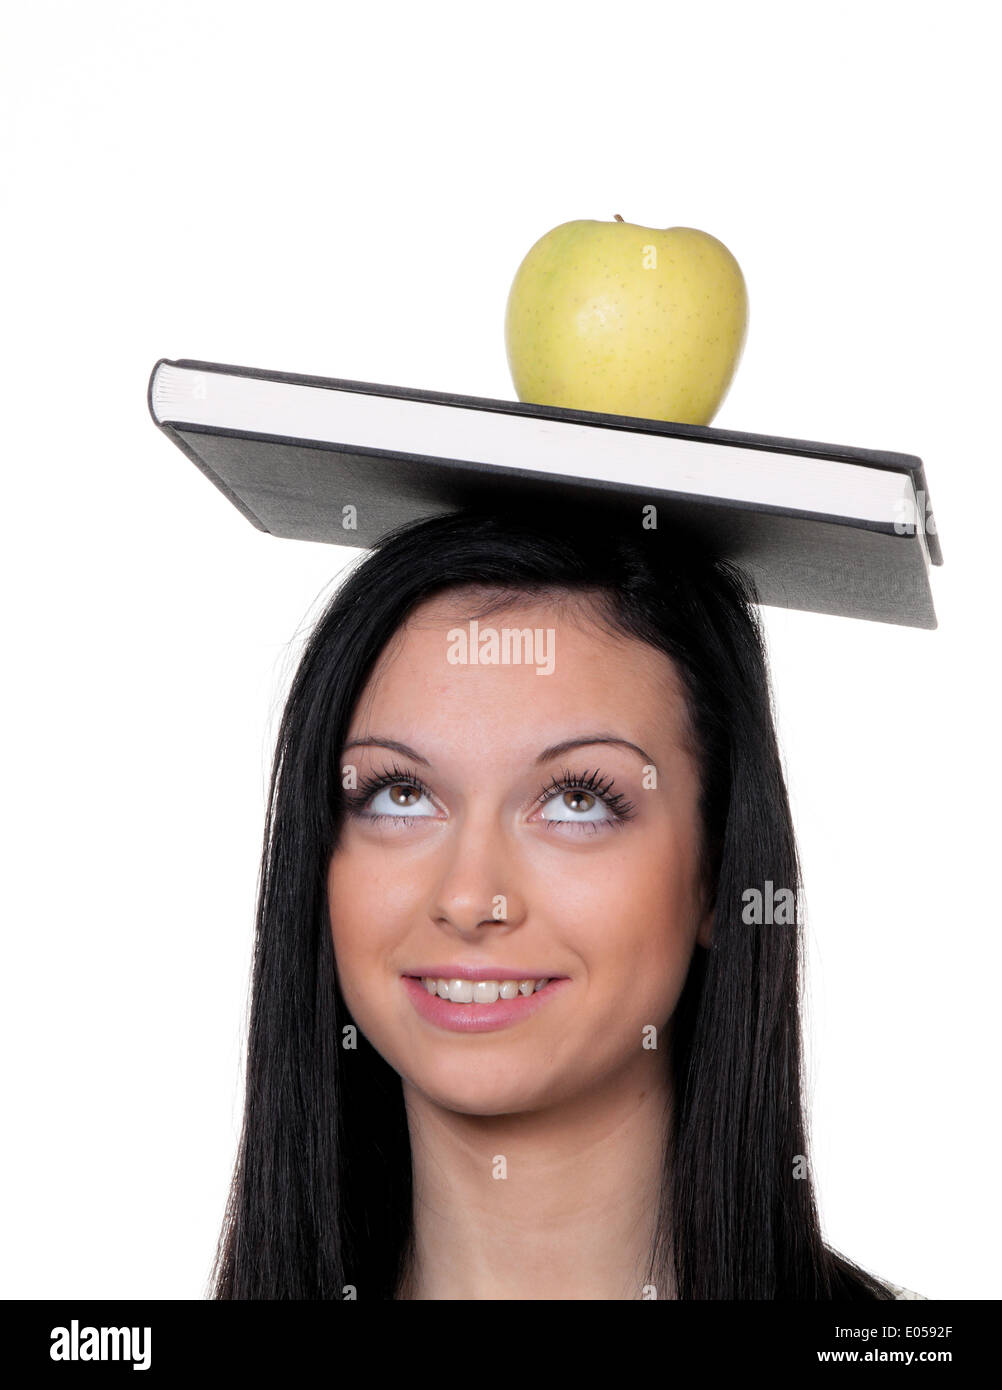 Student with apple and book with learn, Studentin mit Apfel und Buch beim lernen Stock Photo